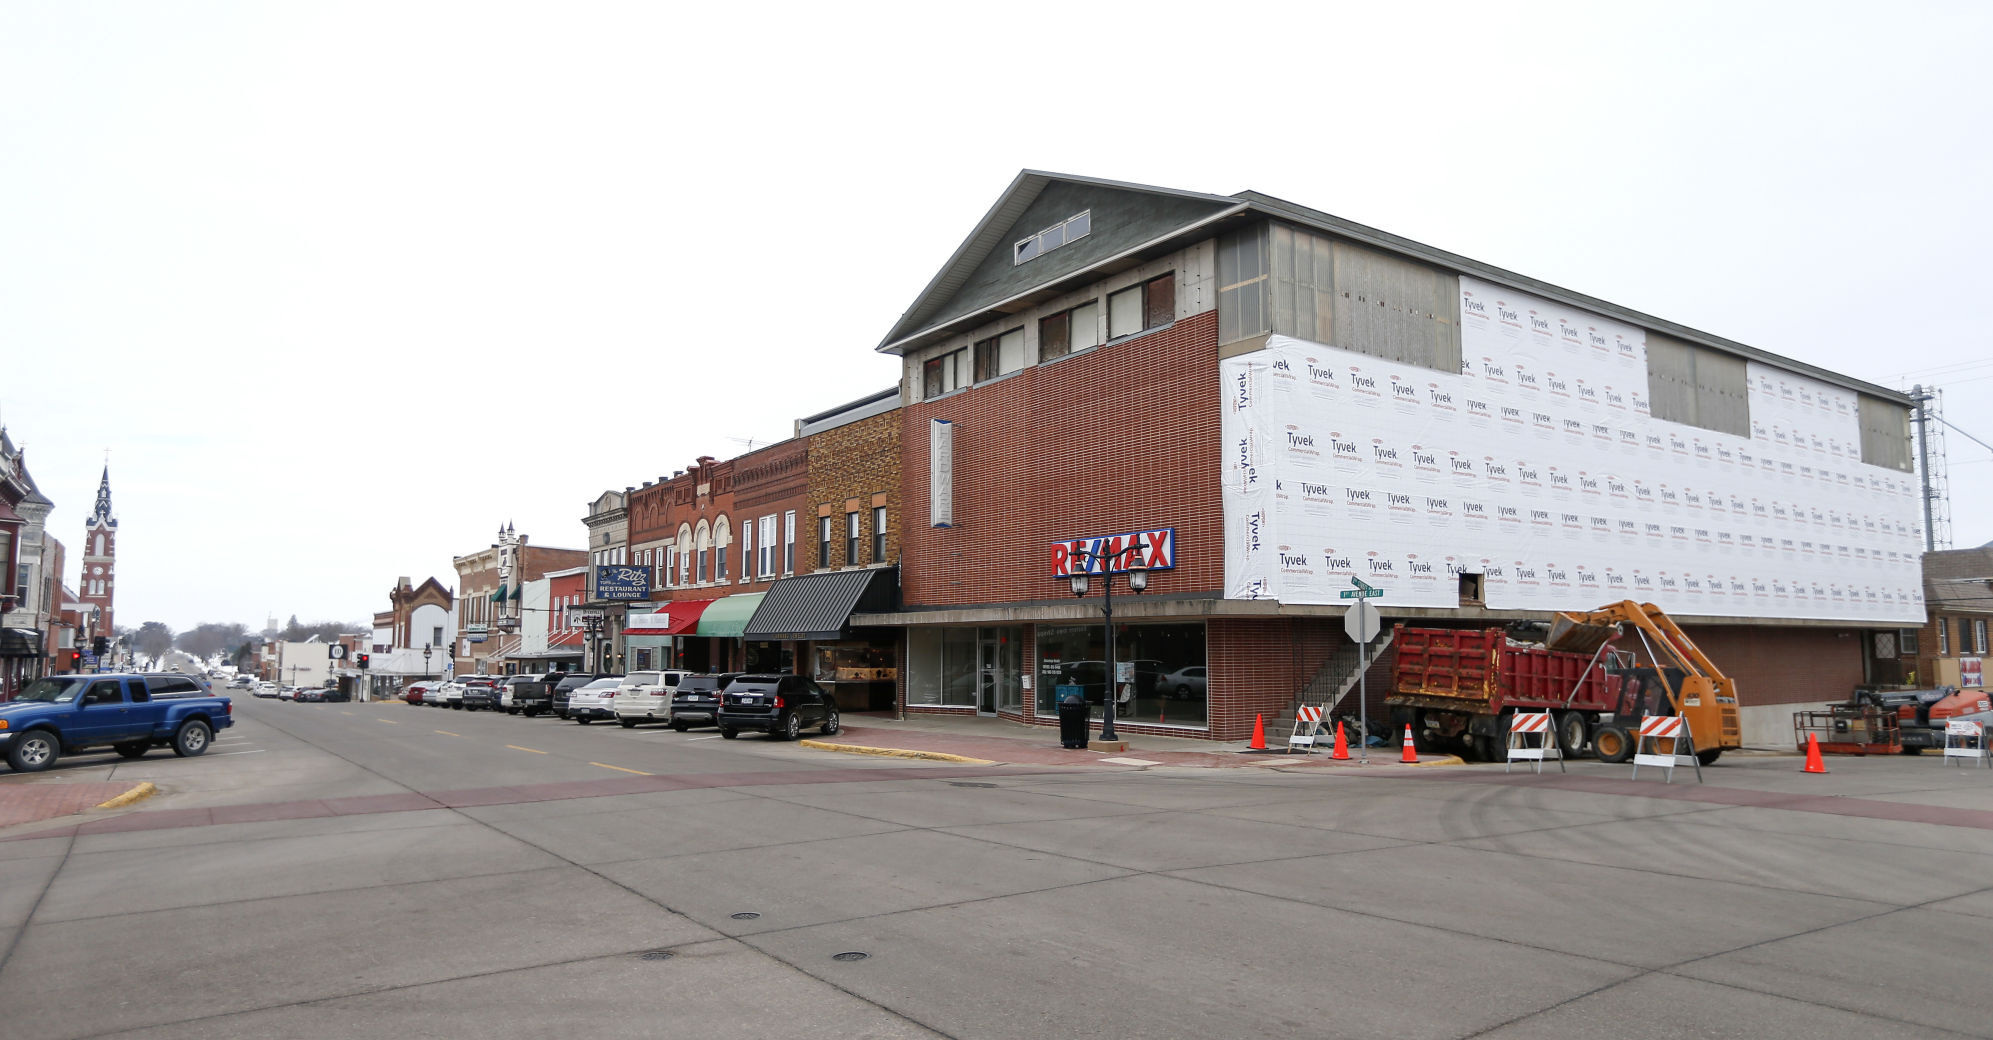 Renovations are underway to the Schuster Building located at First Avenue East and Third Street Northeast in Dyersville, Iowa. The building is being repurposed for commercial, storage and residential. PHOTO CREDIT: Dave Kettering